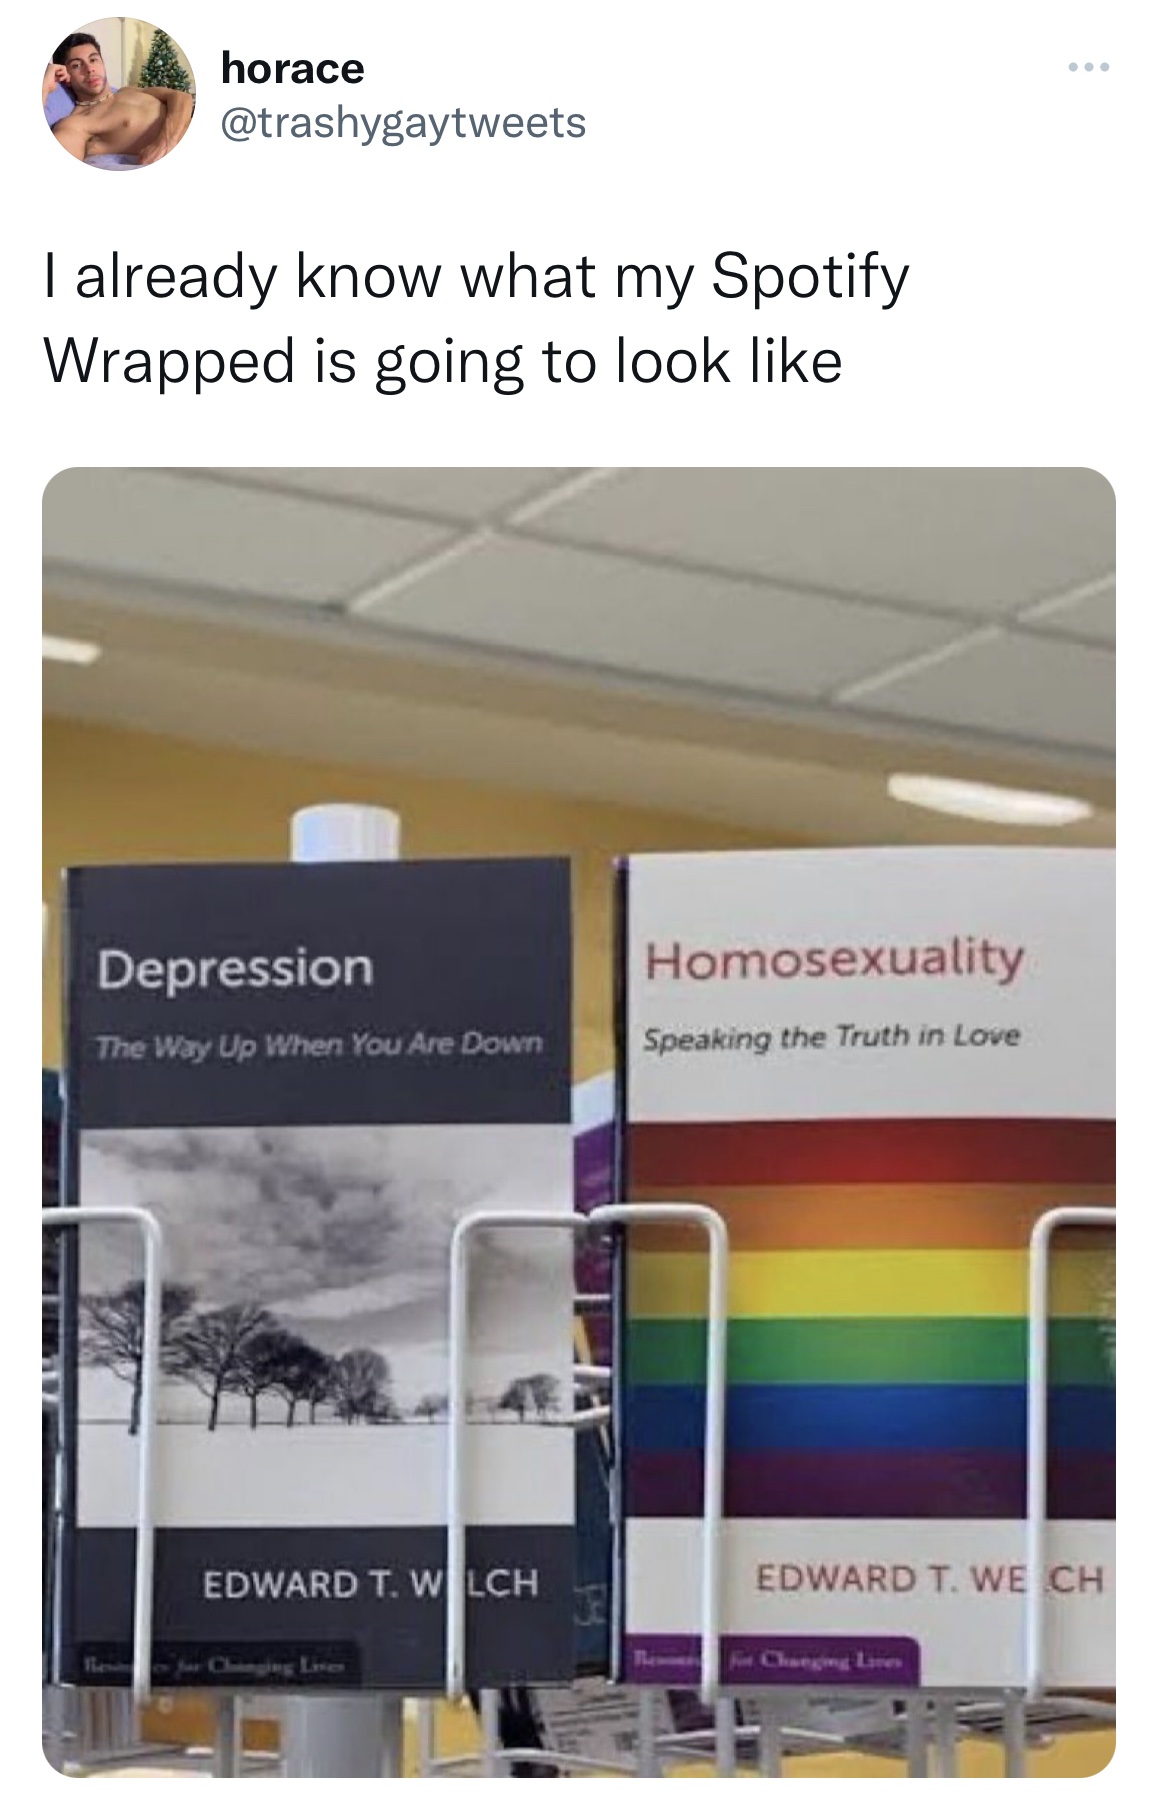 Spotify Wrapped Memes - depression the way up when you are down - horace I already know what my Spotify Wrapped is going to look Depression The Way Up When You Are Down Edward T. Welch Homosexuality Speaking the Truth in Love Edward T. We Ch For Changing 